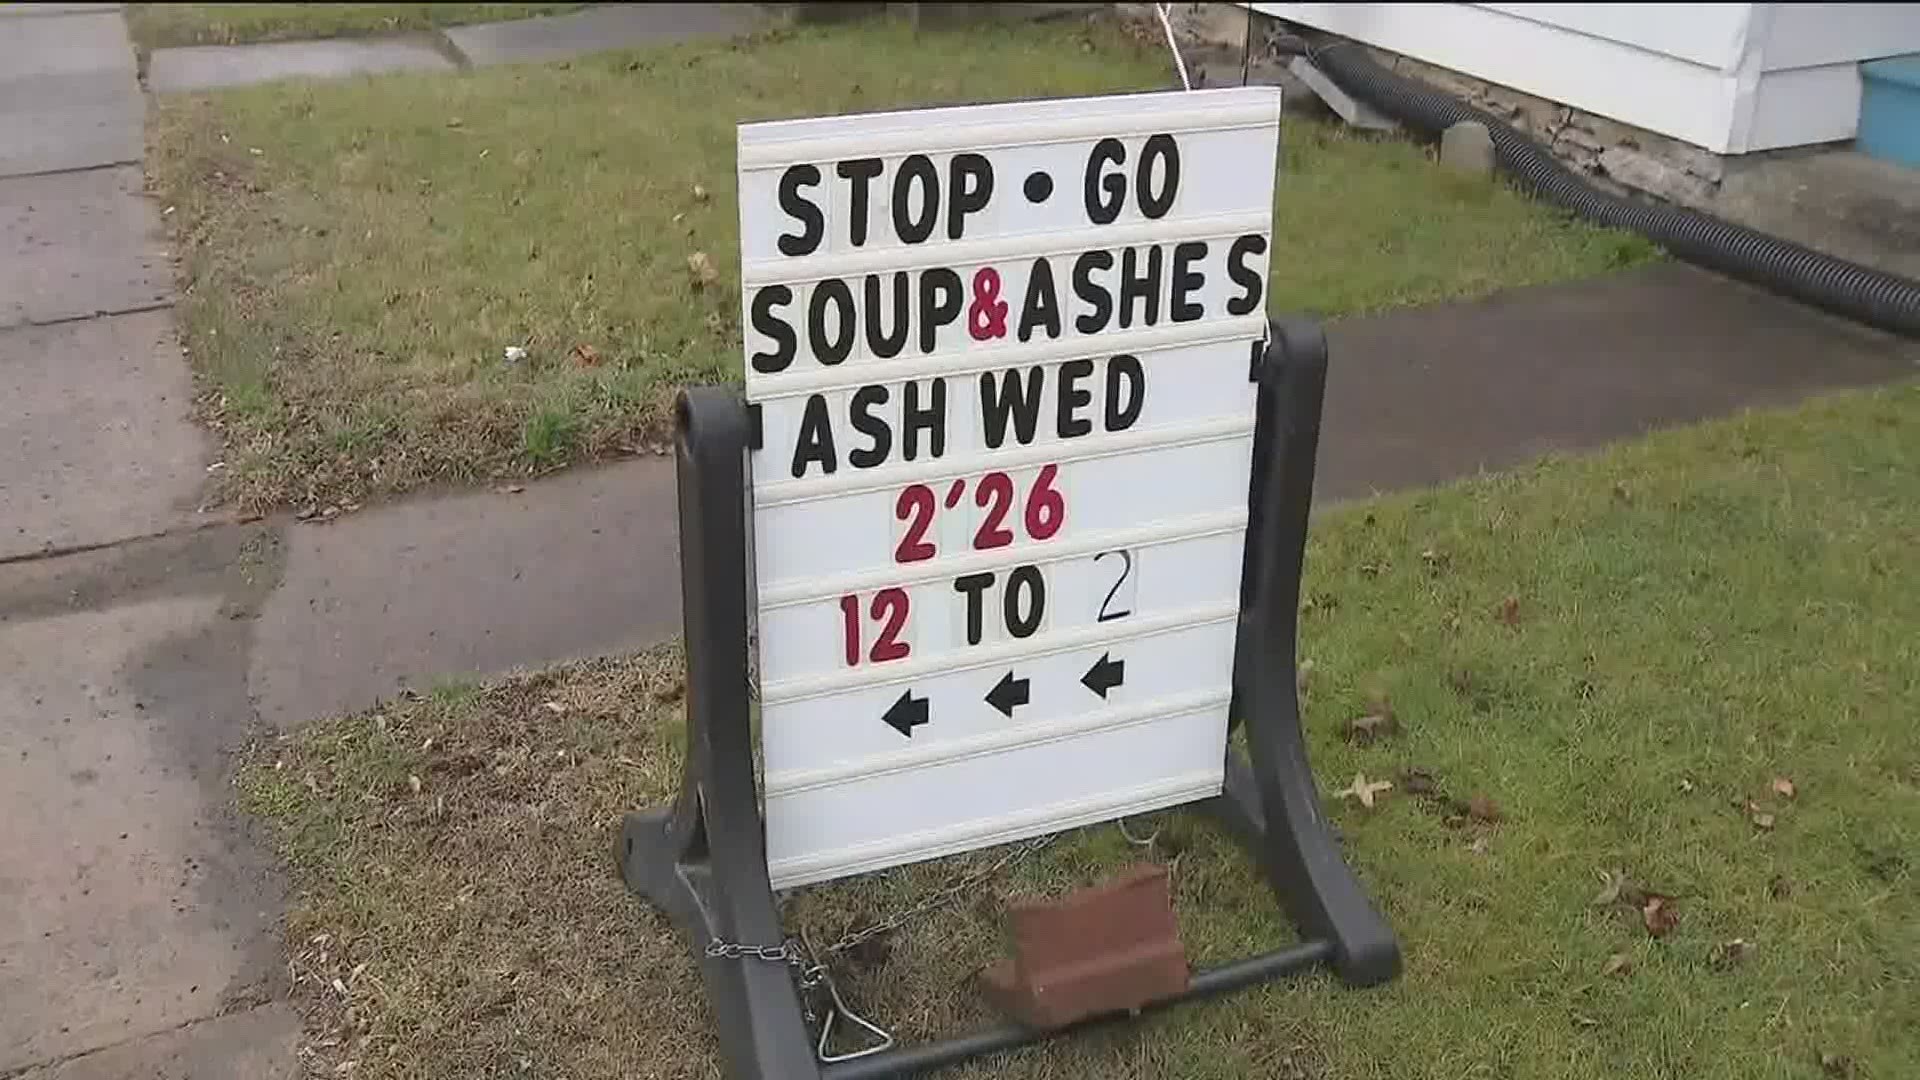 The church in Northumberland County offered stop-and-go soup and ashes.